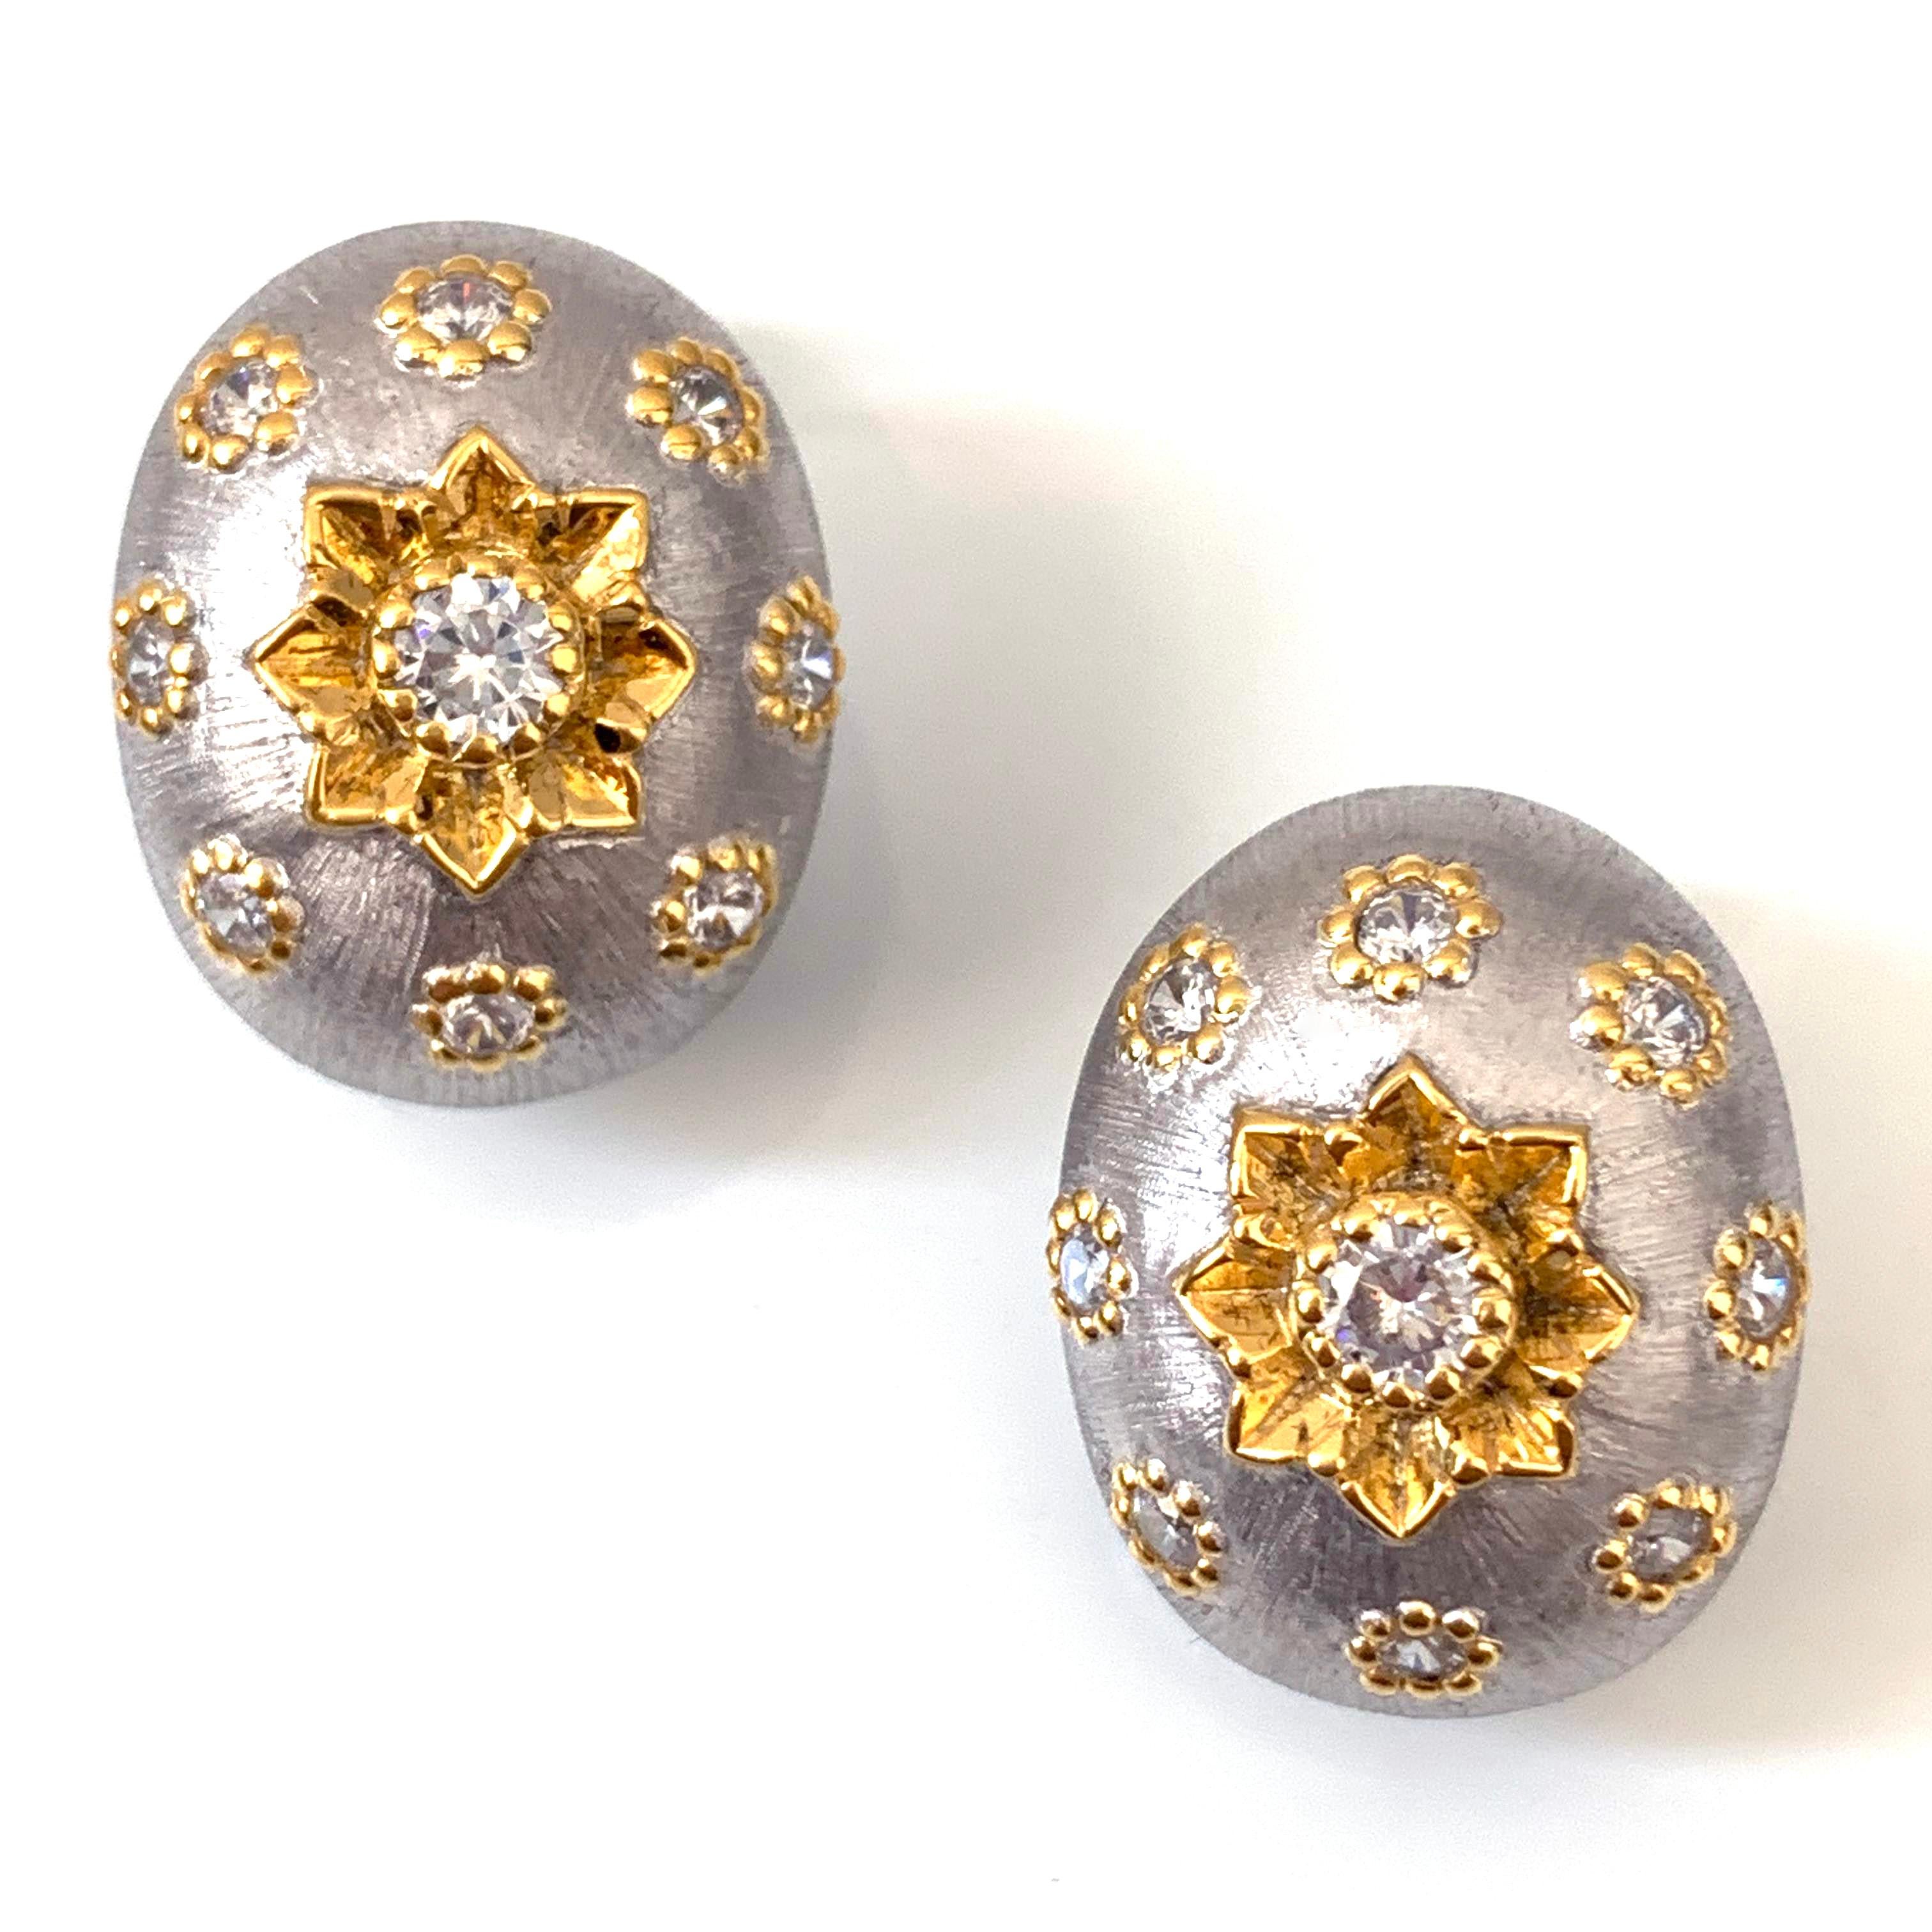 This pair of stunning hand-engraved oval bombe shape clip-on earrings feature hand-engraved flower, handcrafted Italian Rigato etching technique, and are handset with simulated diamond cz. Platinum rhodium and 18k Gold two tone plated sterling